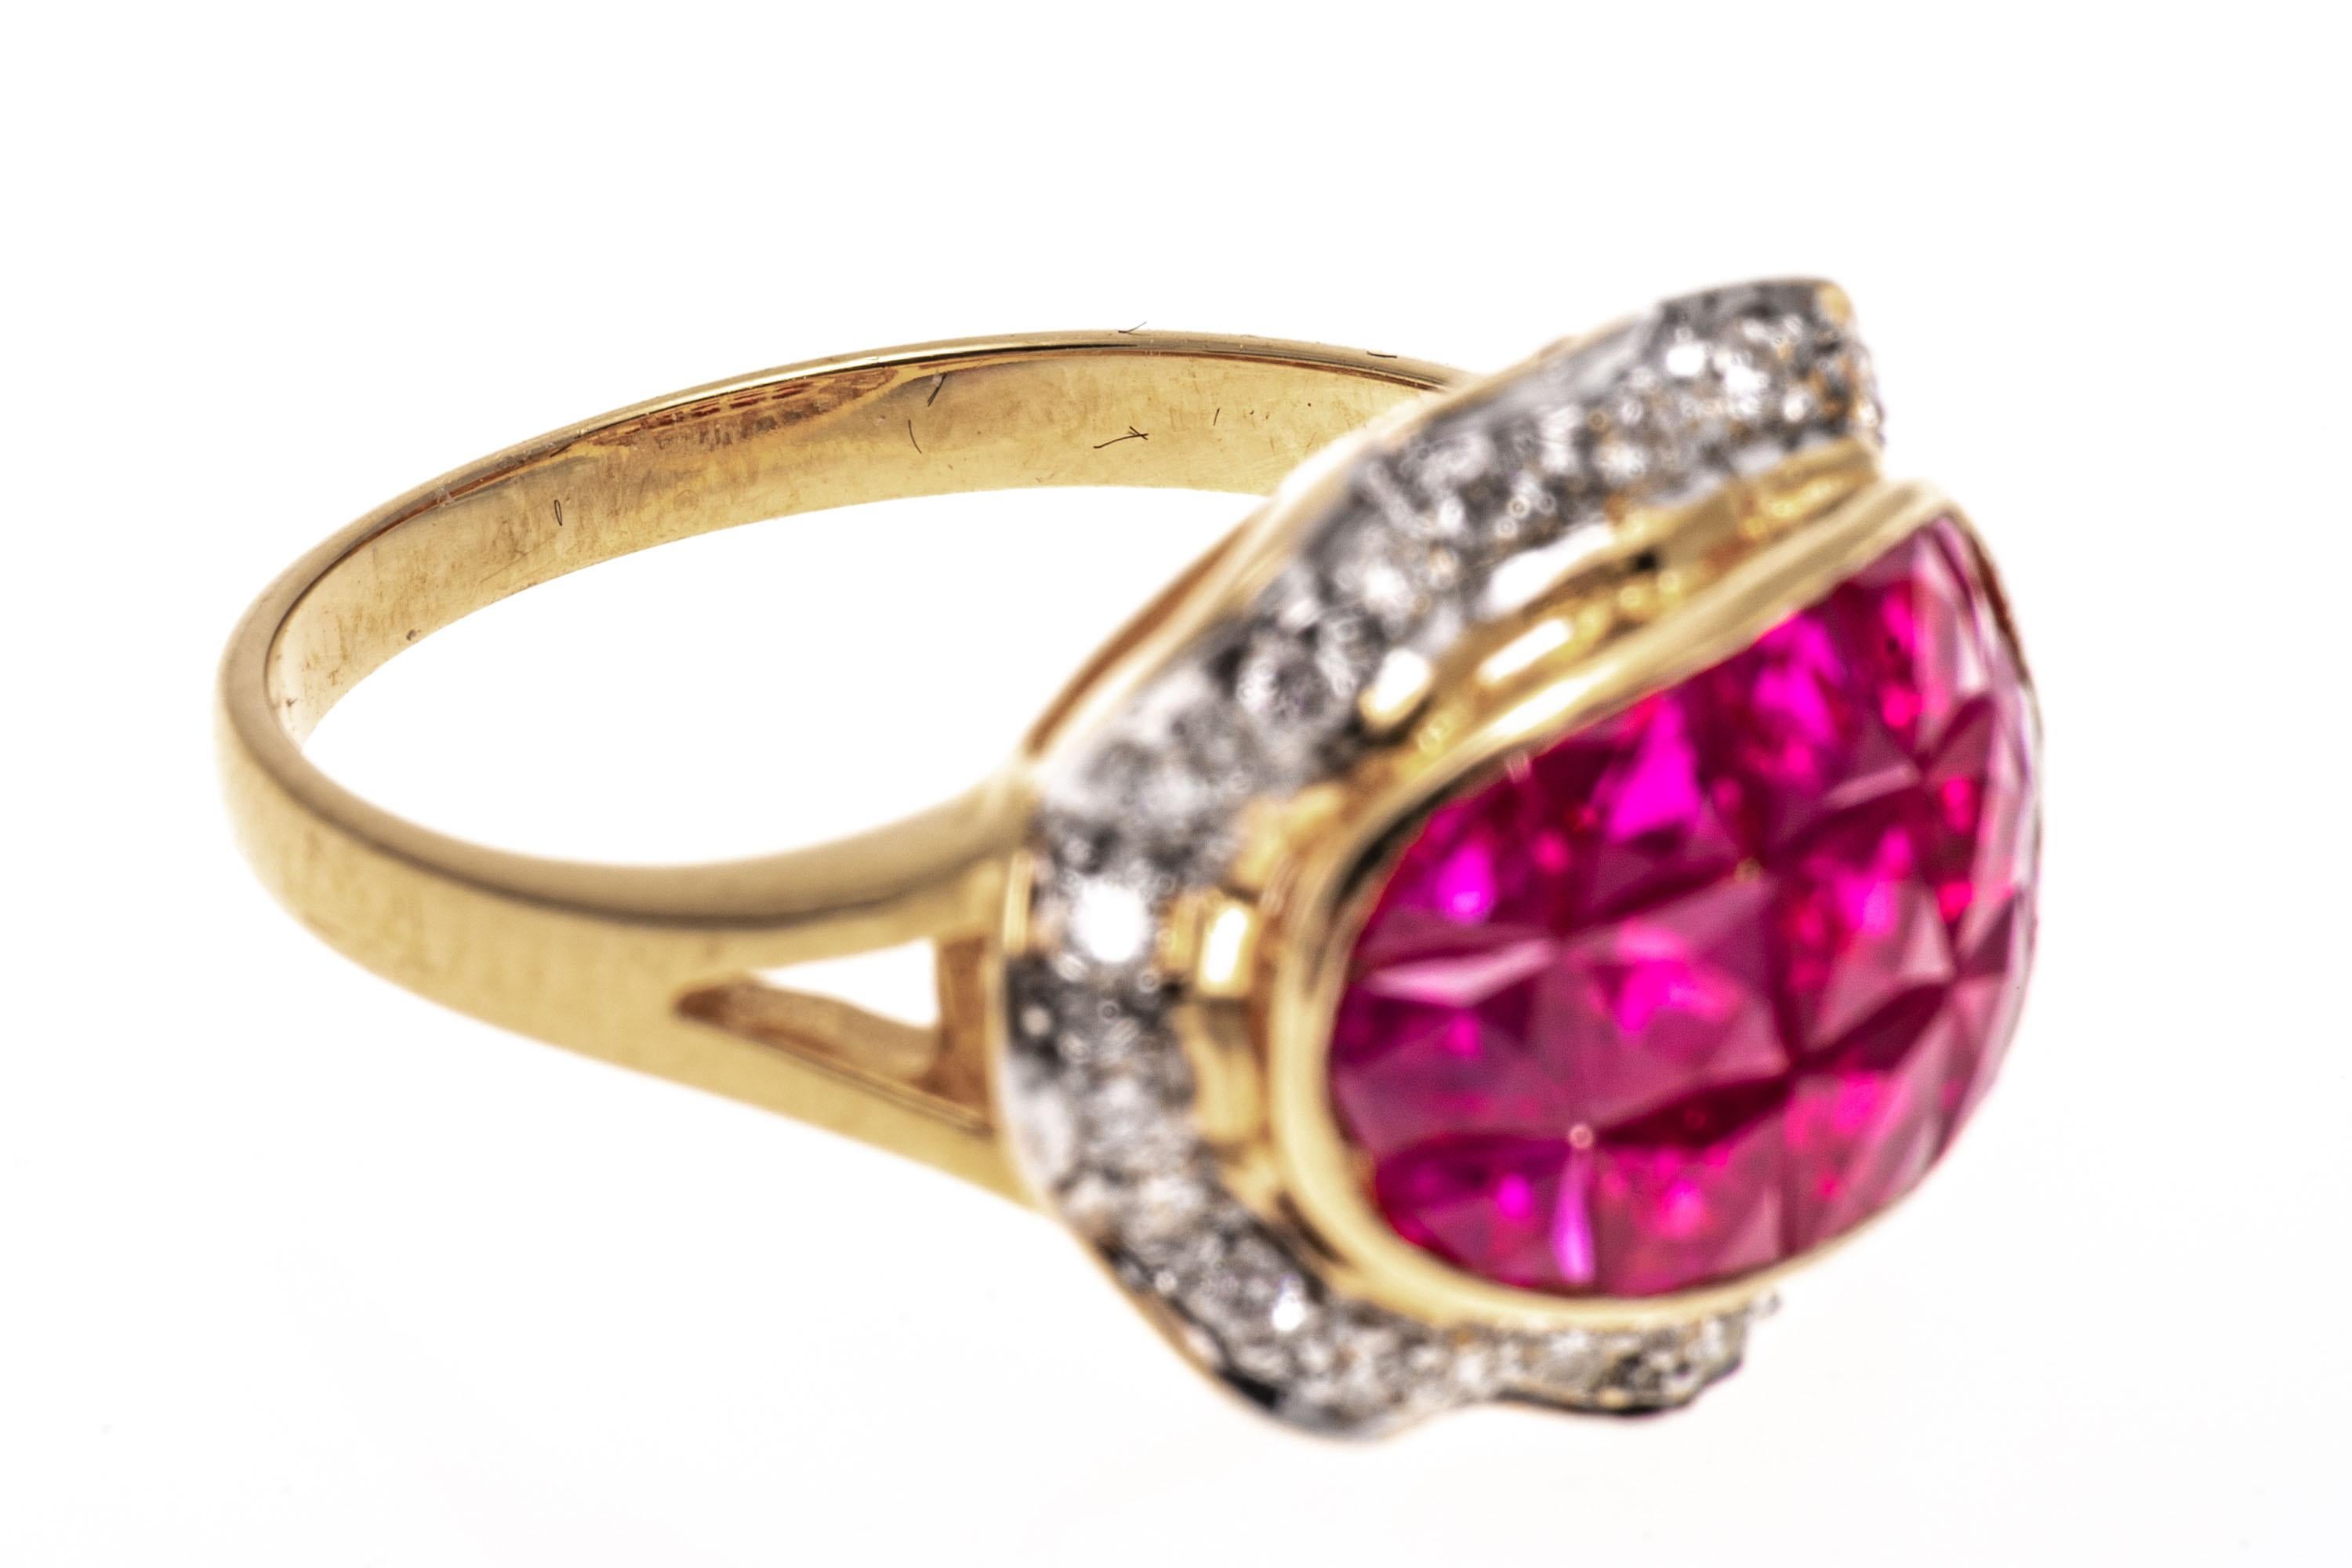 Mixed Cut 18k Yellow Gold Calibre Cut Ruby Ring With Ruffled Diamond Border, Size 7 For Sale